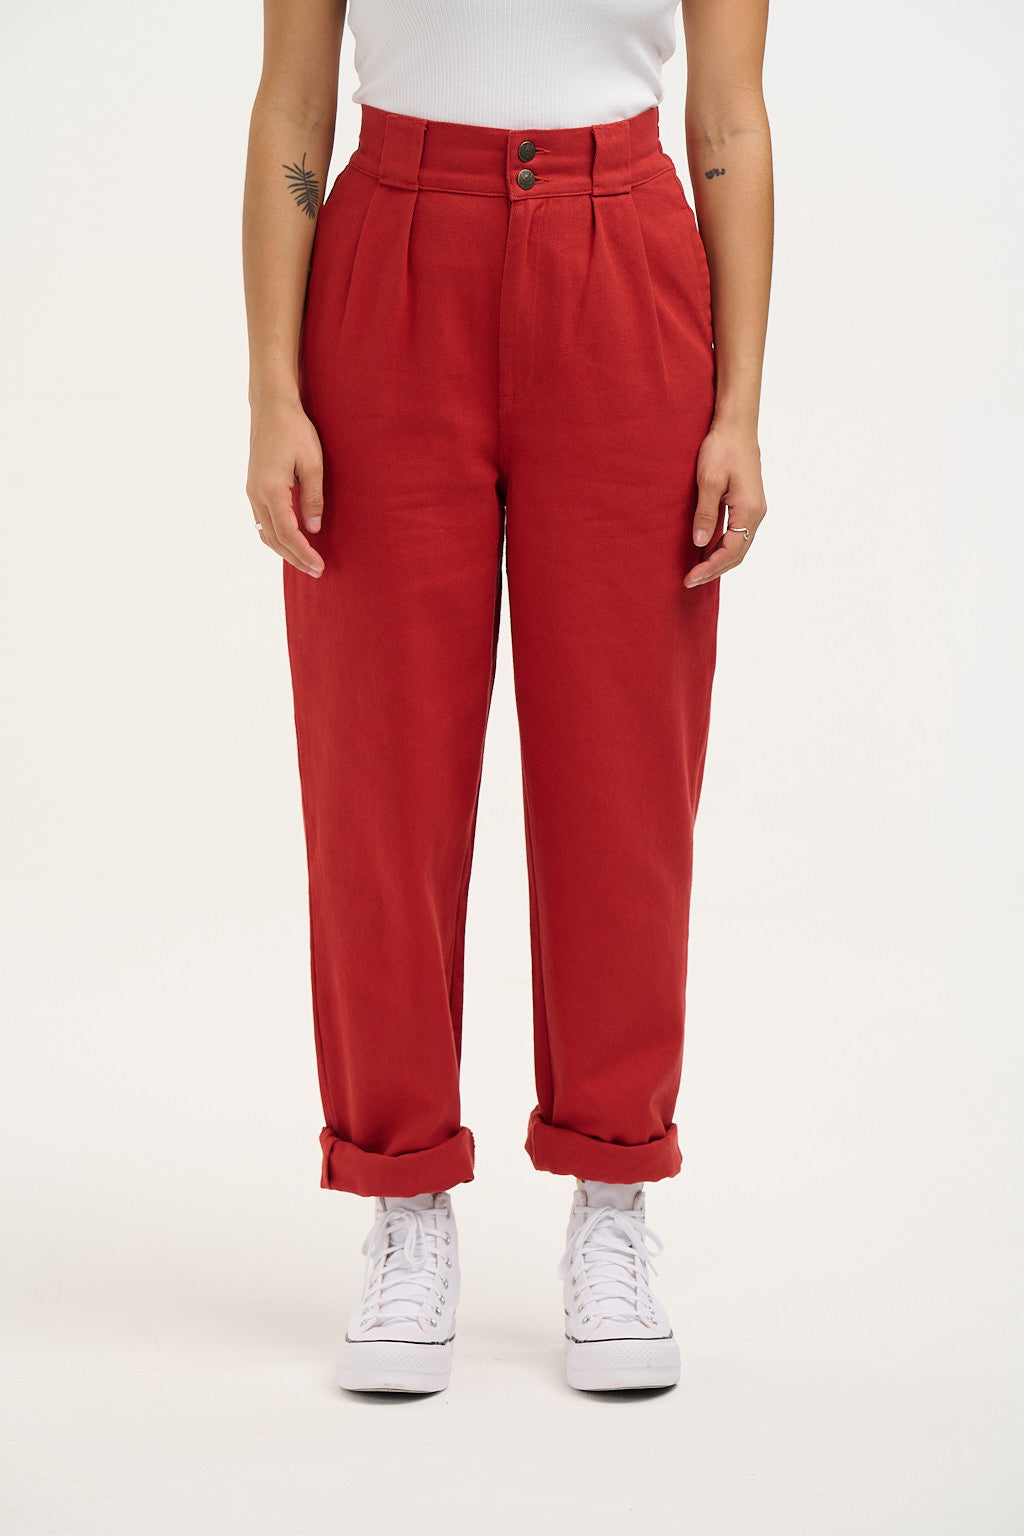 Hfyihgf Women's Drawstring Mid Waisted Cropped Tapered Faux Leather Pants  Casual Comforty Slim Stretchy Trousers(Red,M) - Walmart.com